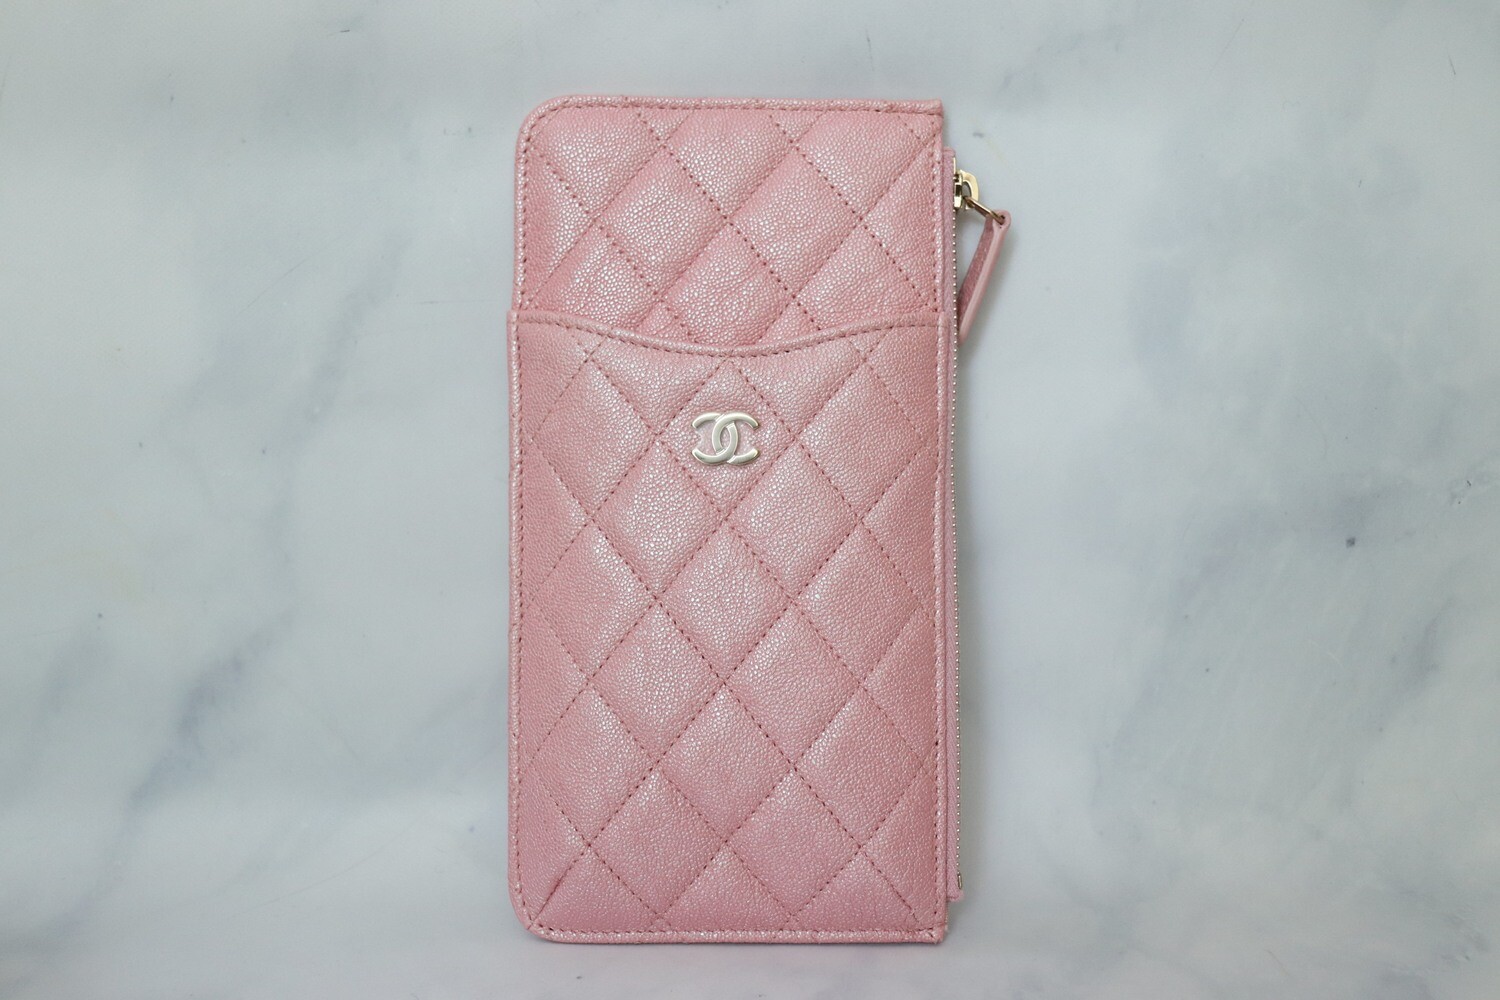 Chanel Phone Case 19S Pink, New in Box